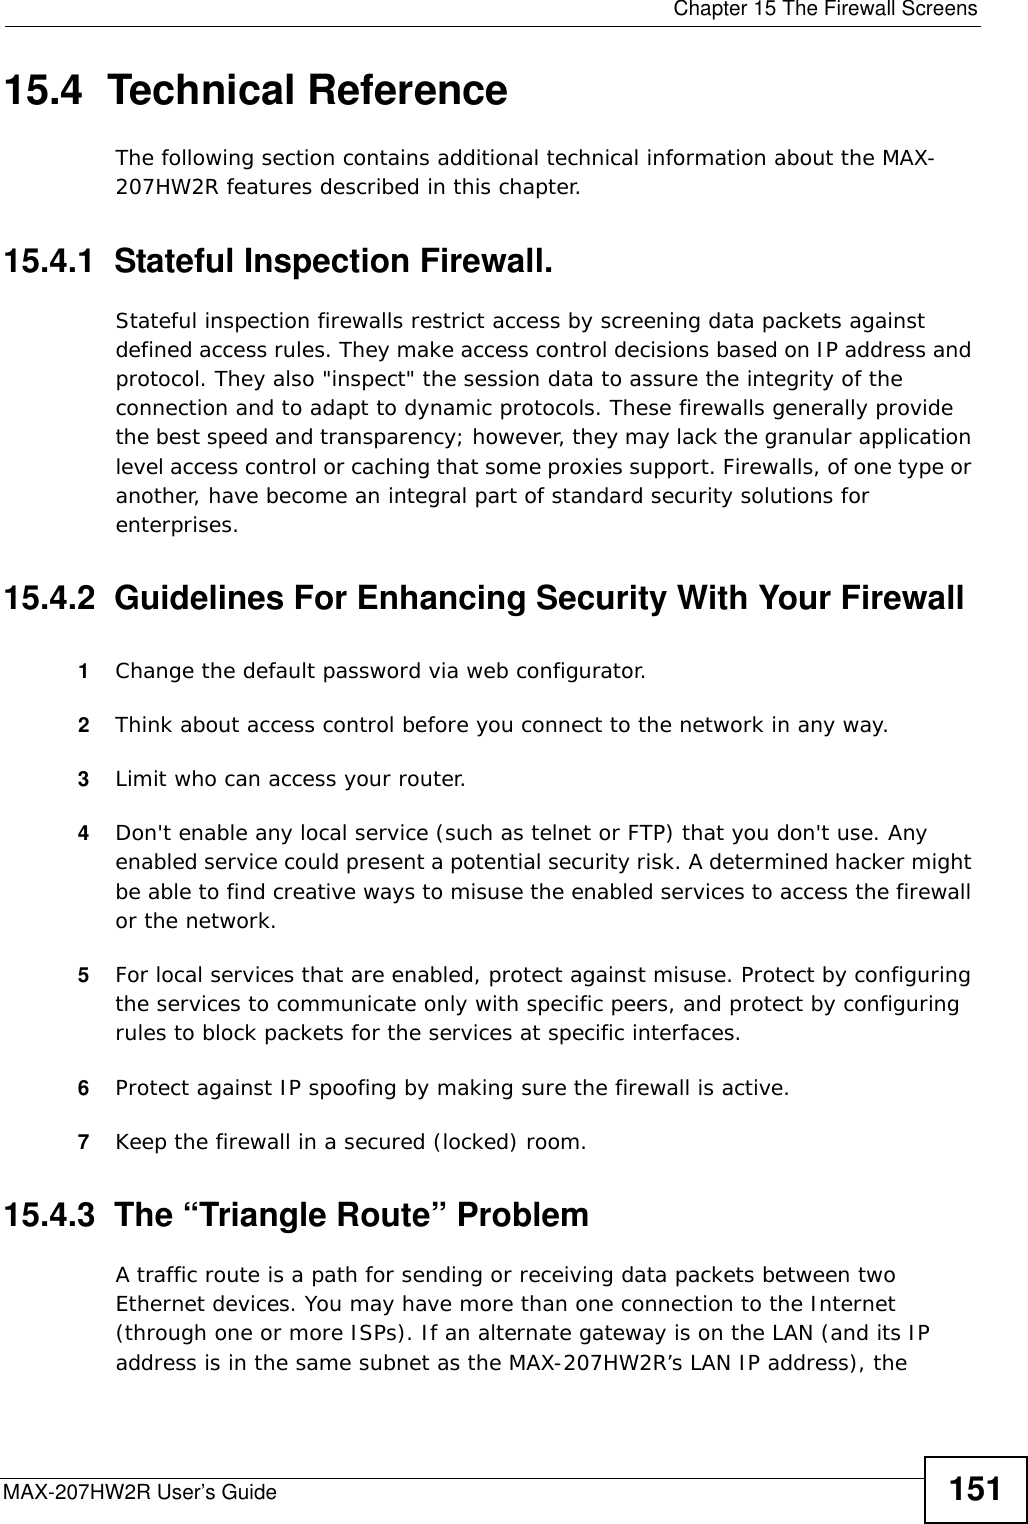  Chapter 15 The Firewall ScreensMAX-207HW2R User’s Guide 15115.4  Technical ReferenceThe following section contains additional technical information about the MAX-207HW2R features described in this chapter.15.4.1  Stateful Inspection Firewall.Stateful inspection firewalls restrict access by screening data packets against defined access rules. They make access control decisions based on IP address and protocol. They also &quot;inspect&quot; the session data to assure the integrity of the connection and to adapt to dynamic protocols. These firewalls generally provide the best speed and transparency; however, they may lack the granular application level access control or caching that some proxies support. Firewalls, of one type or another, have become an integral part of standard security solutions for enterprises.15.4.2  Guidelines For Enhancing Security With Your Firewall1Change the default password via web configurator.2Think about access control before you connect to the network in any way.3Limit who can access your router.4Don&apos;t enable any local service (such as telnet or FTP) that you don&apos;t use. Any enabled service could present a potential security risk. A determined hacker might be able to find creative ways to misuse the enabled services to access the firewall or the network.5For local services that are enabled, protect against misuse. Protect by configuring the services to communicate only with specific peers, and protect by configuring rules to block packets for the services at specific interfaces.6Protect against IP spoofing by making sure the firewall is active.7Keep the firewall in a secured (locked) room.15.4.3  The “Triangle Route” ProblemA traffic route is a path for sending or receiving data packets between two Ethernet devices. You may have more than one connection to the Internet (through one or more ISPs). If an alternate gateway is on the LAN (and its IP address is in the same subnet as the MAX-207HW2R’s LAN IP address), the 